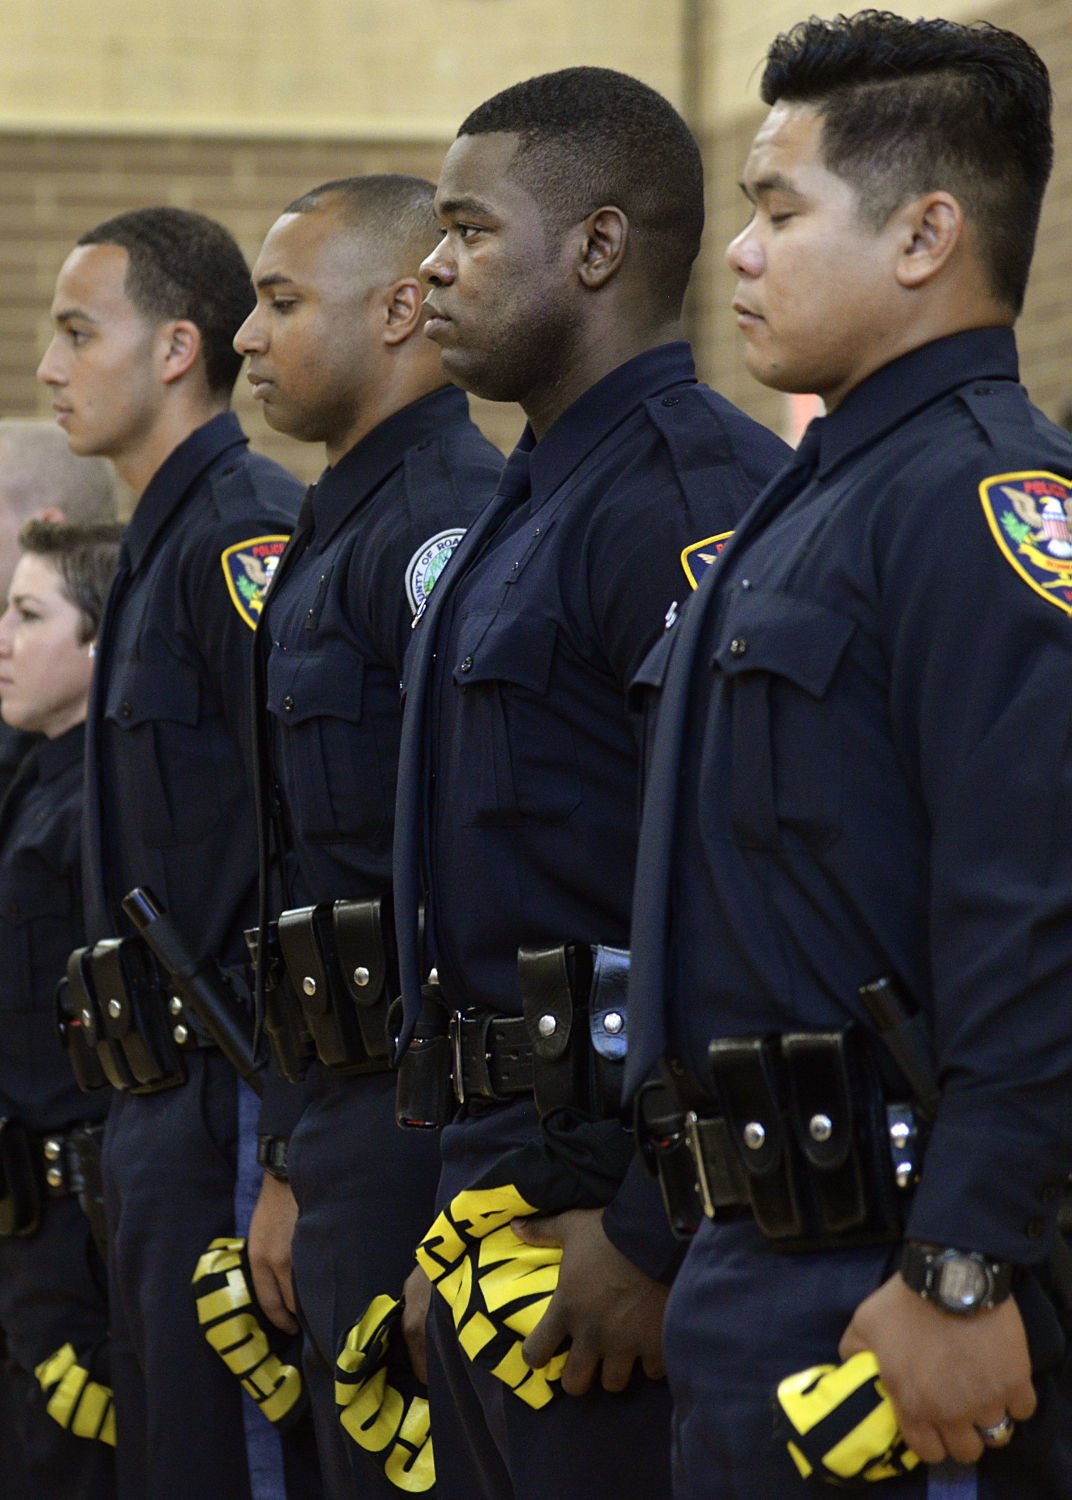 Roanoke Police Training Academy graduates diverse class of officers